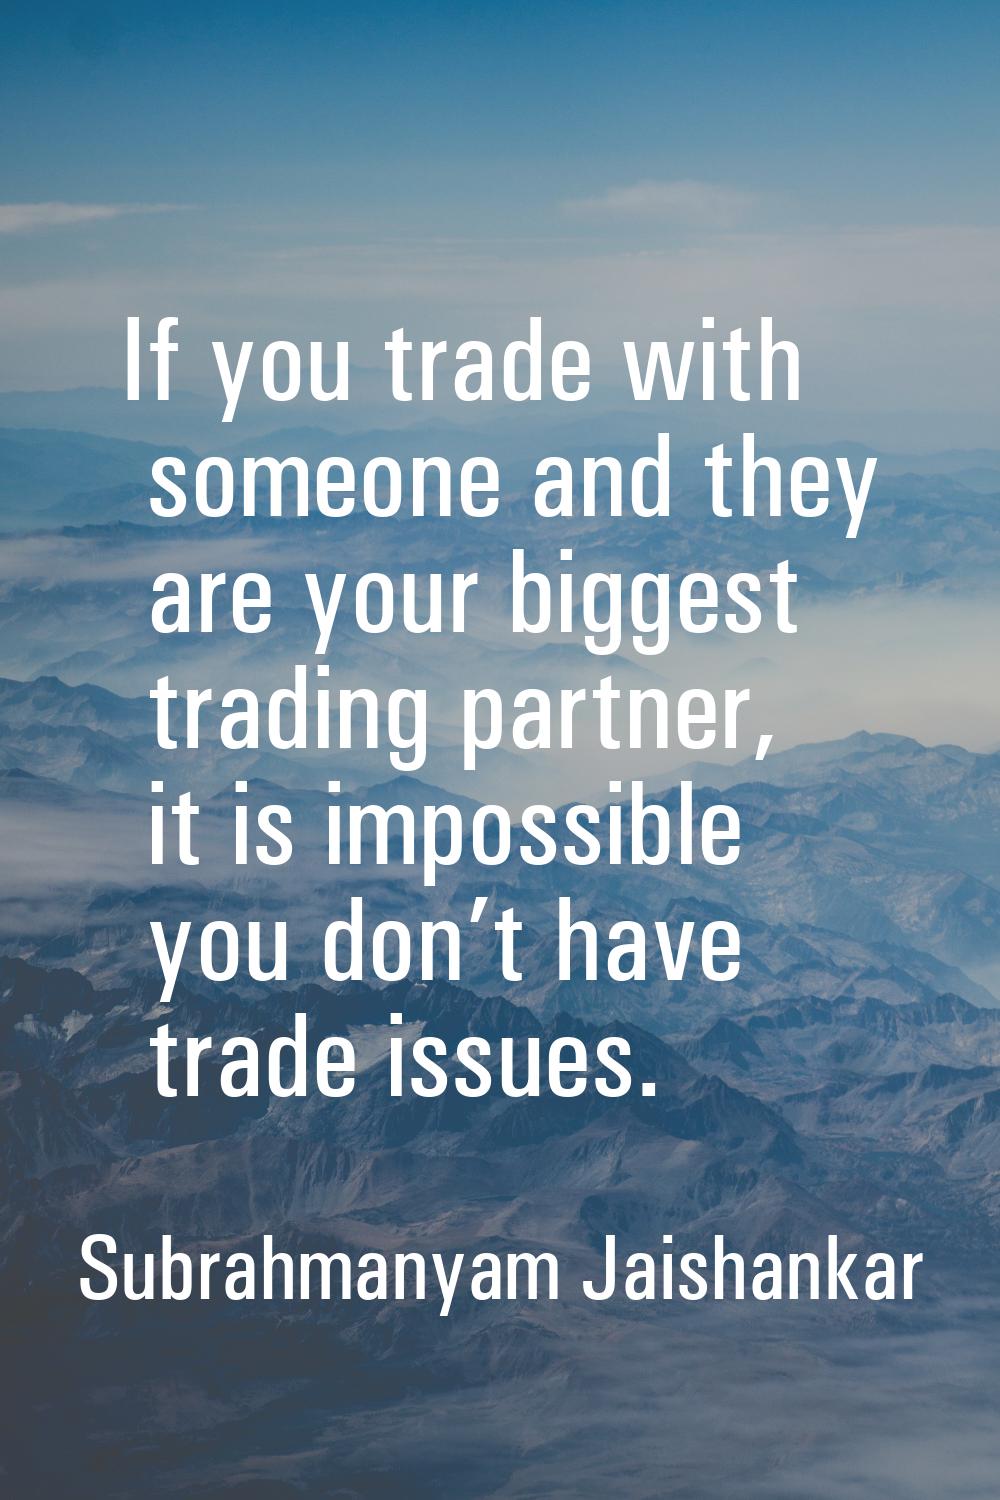 If you trade with someone and they are your biggest trading partner, it is impossible you don’t hav